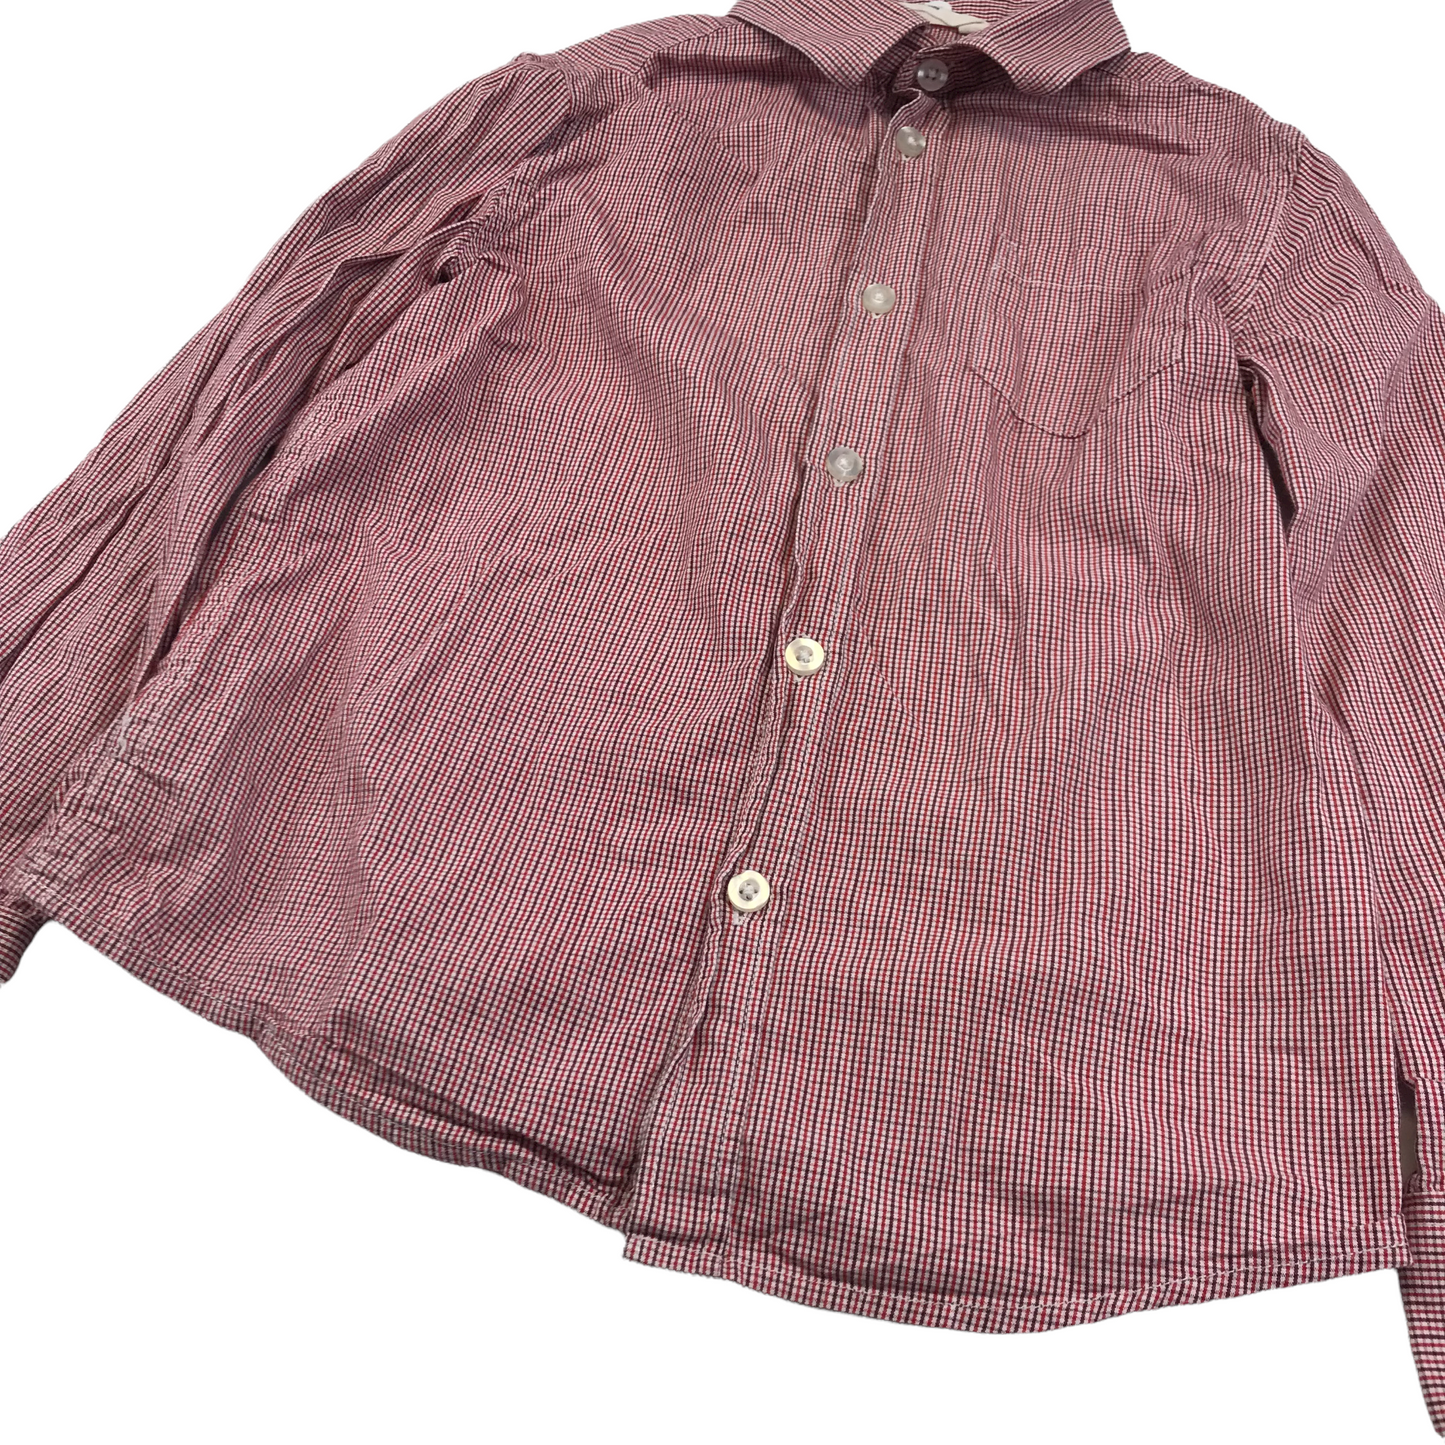 H&M Red Checked Shirt Age 7